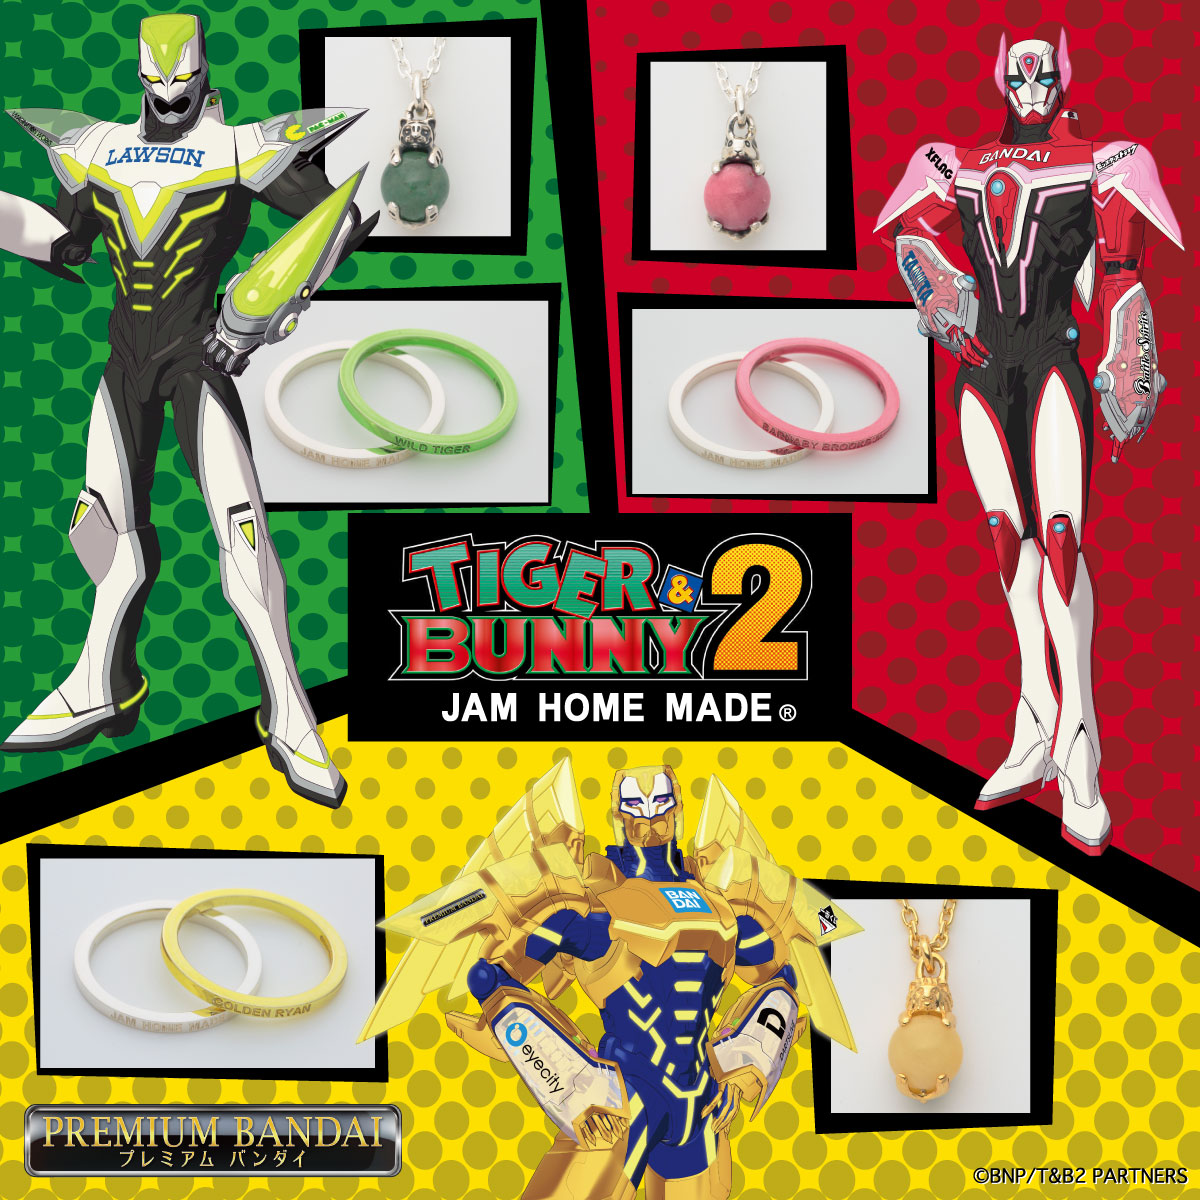 TIGER & BUNNY 2 ×JAM HOME MADEコラボレーションネックレス、リング各